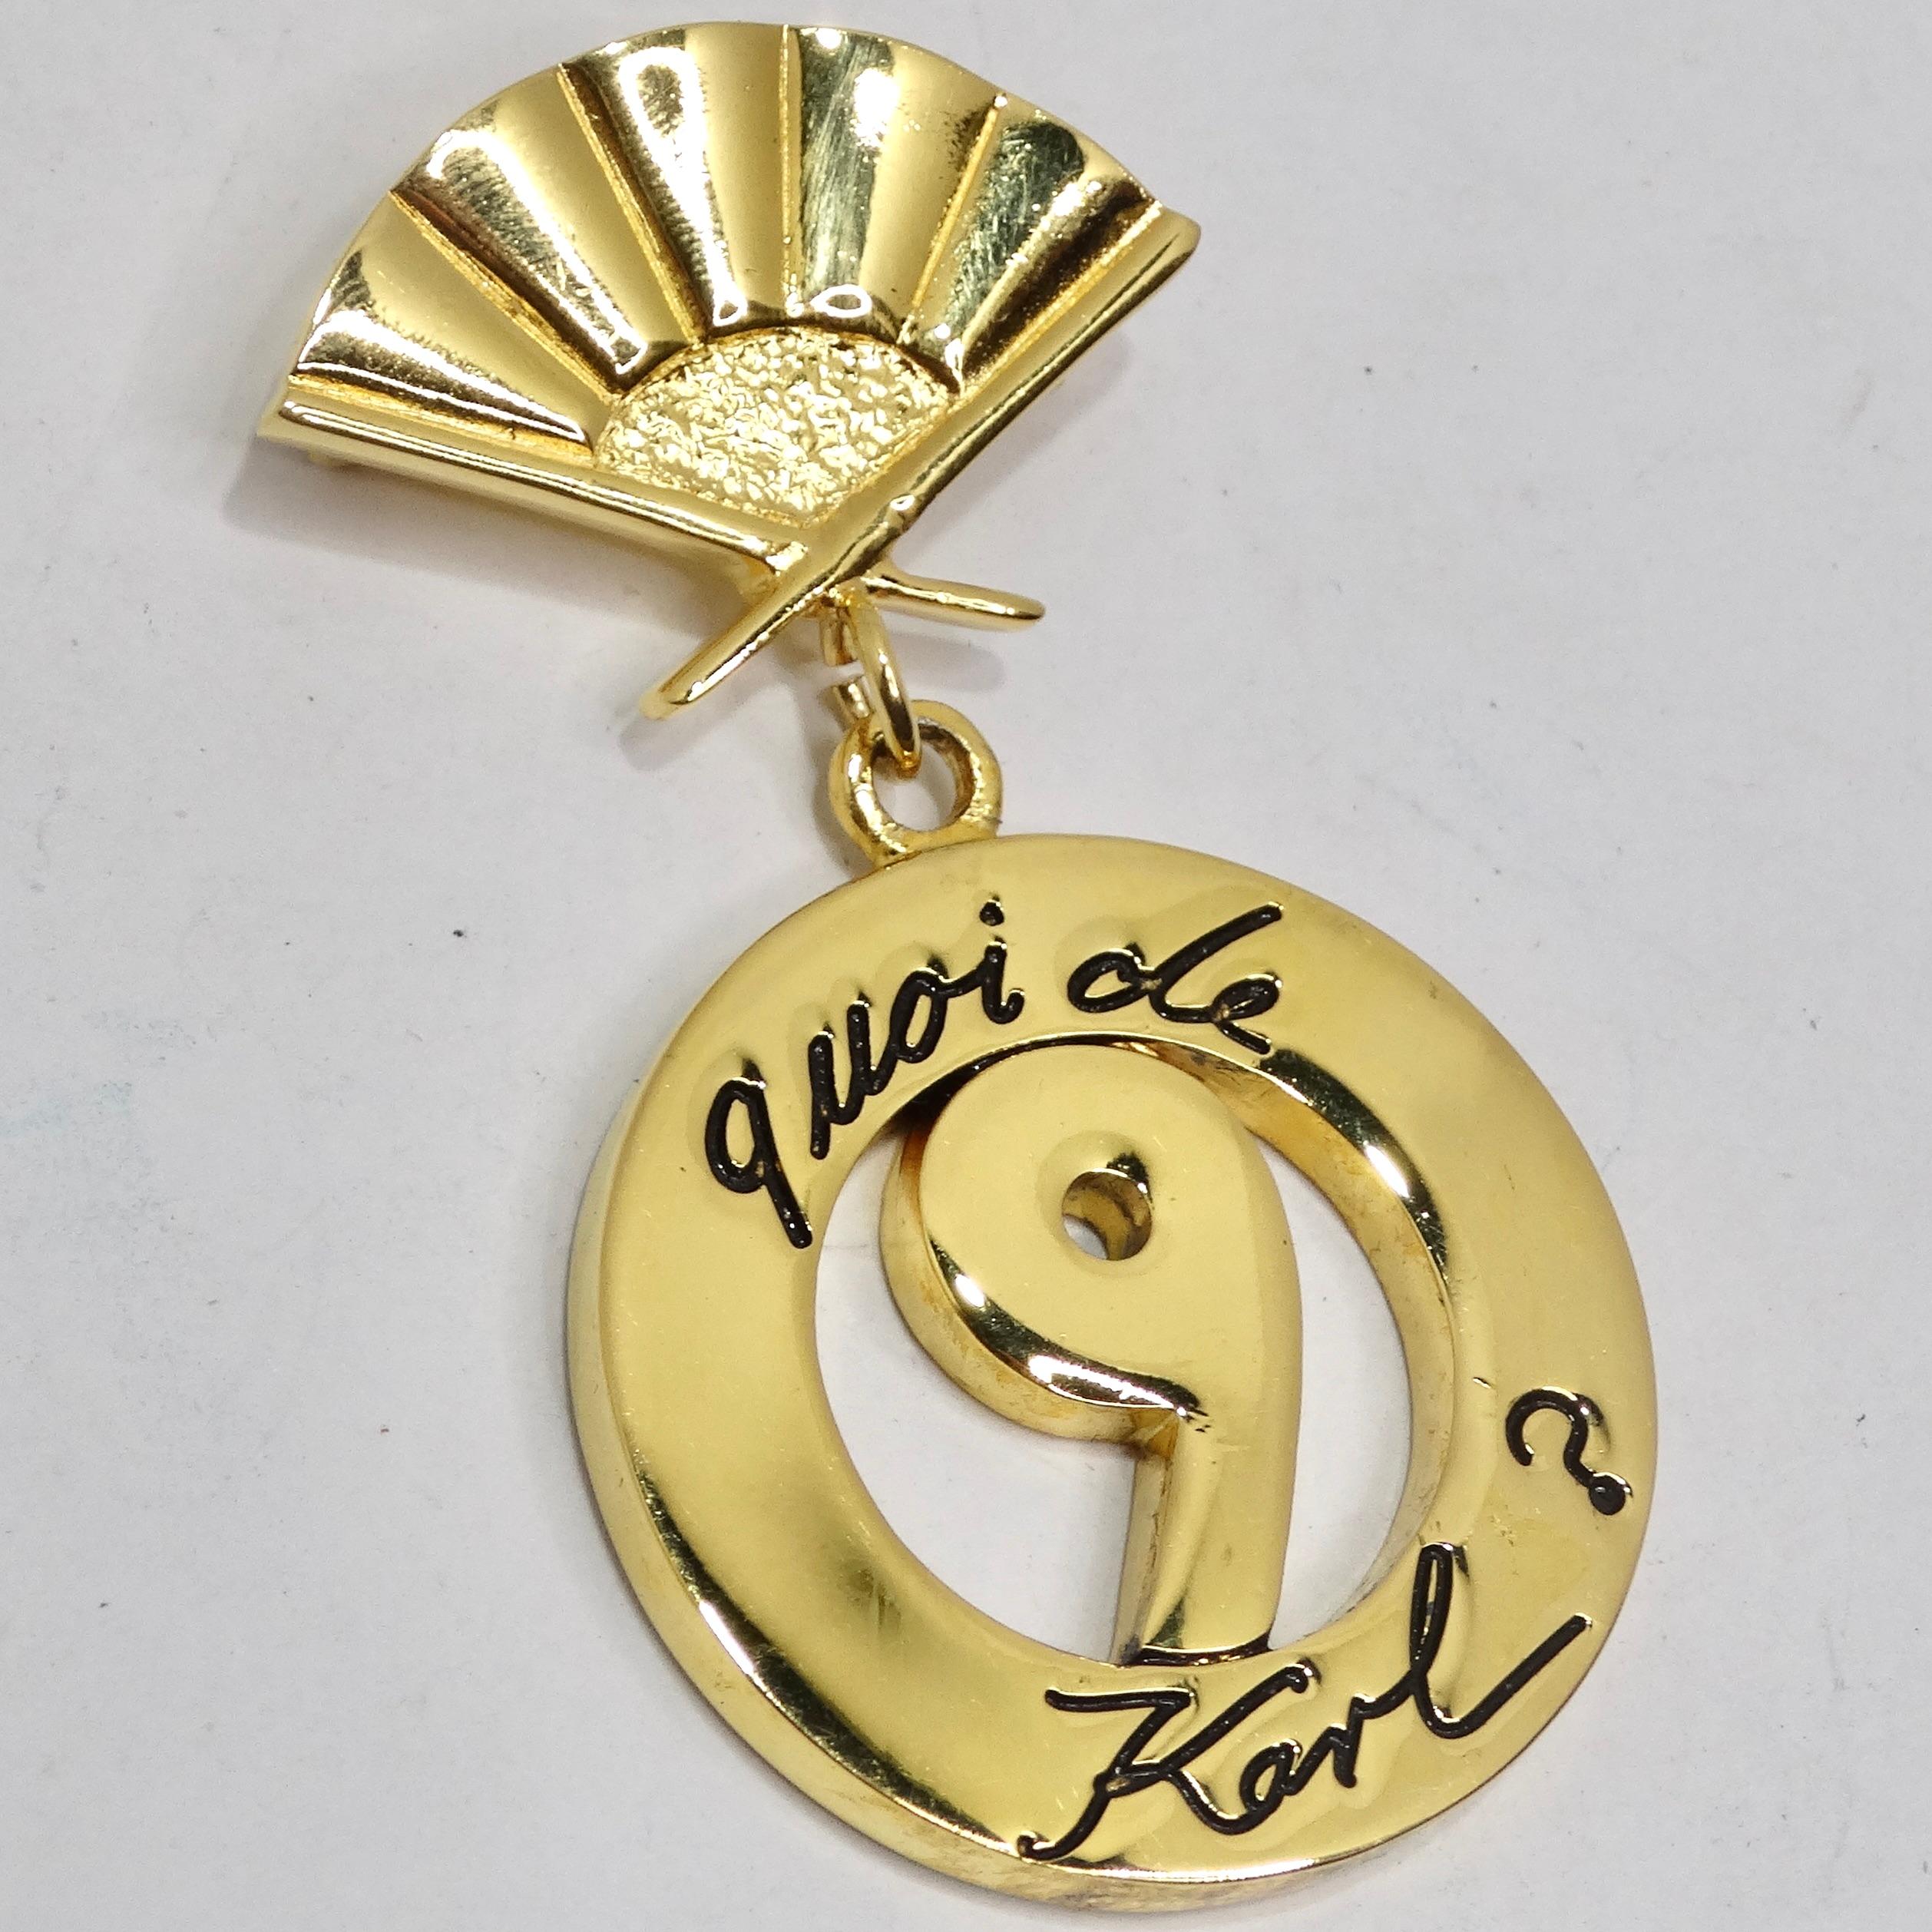 Embrace iconic elegance with the Karl Lagerfeld 1980s 'Quoi de 9 Karl?' Fan Pearl Drop Brooch – a statement piece that pays homage to the legendary designer. This brooch features the iconic fan with an openwork medallion drop, engraved with the